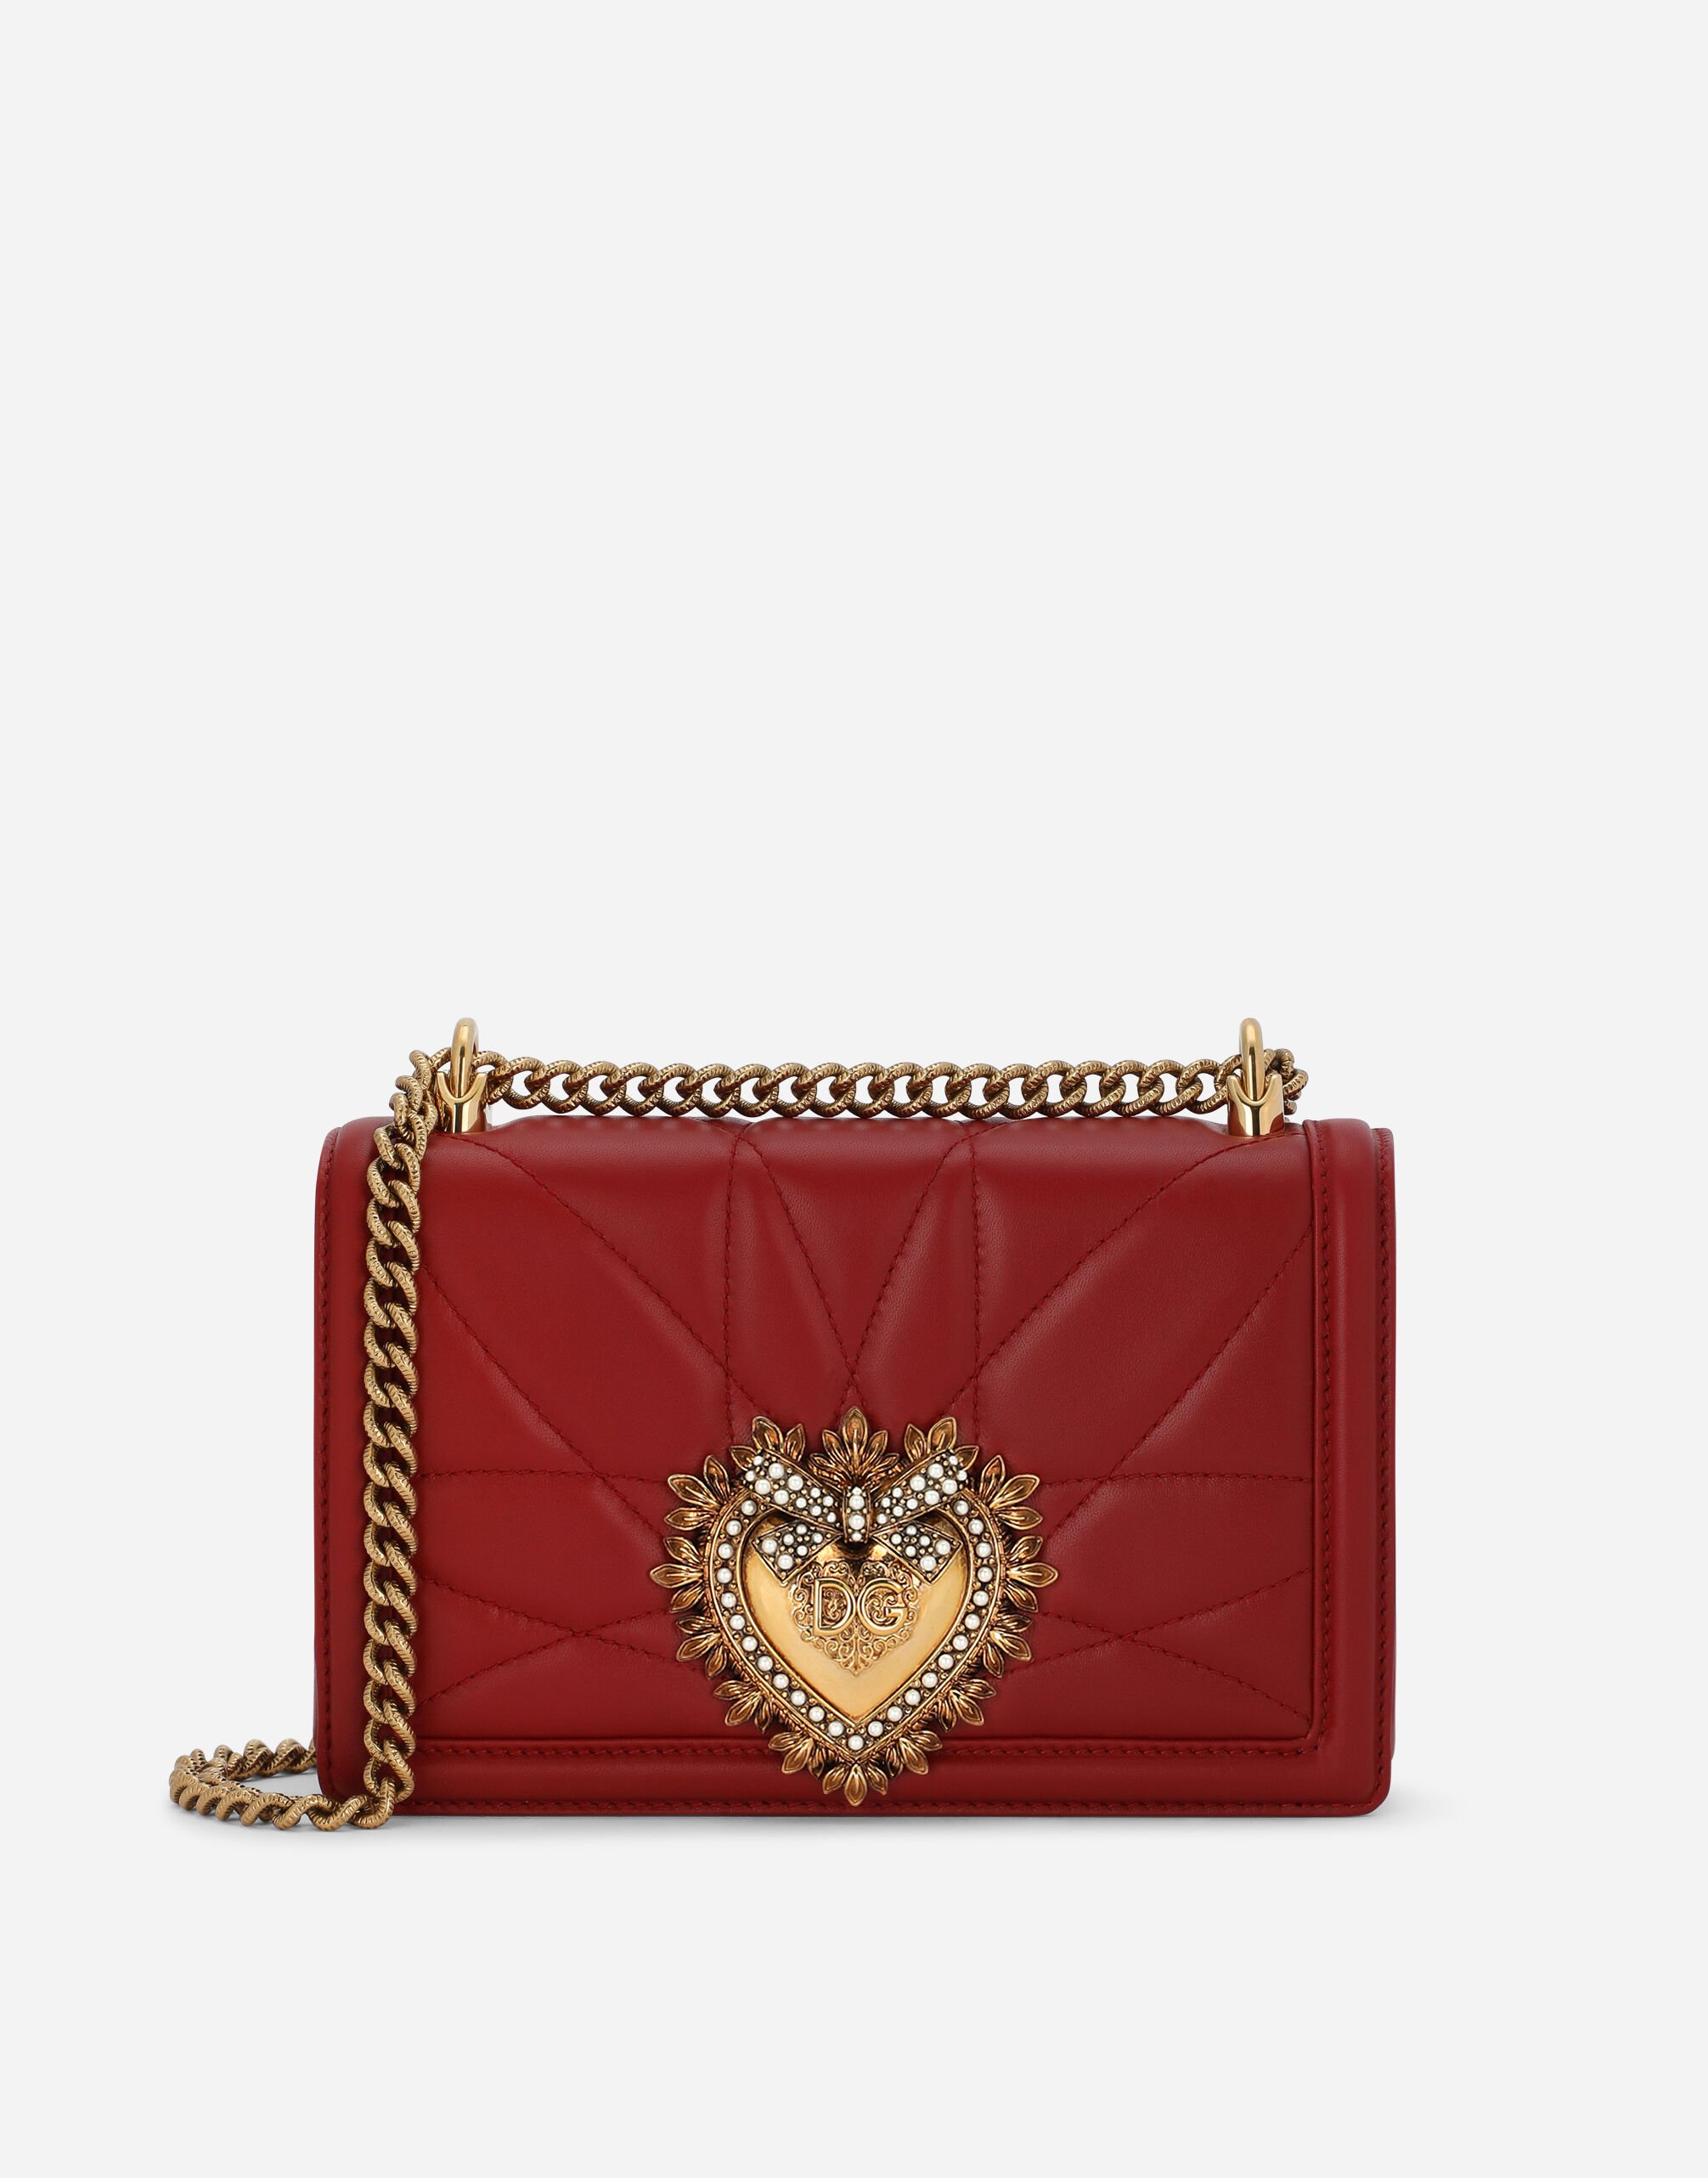 Dolce & Gabbana Medium Devotion bag in quilted nappa leather Red BB6002A1001